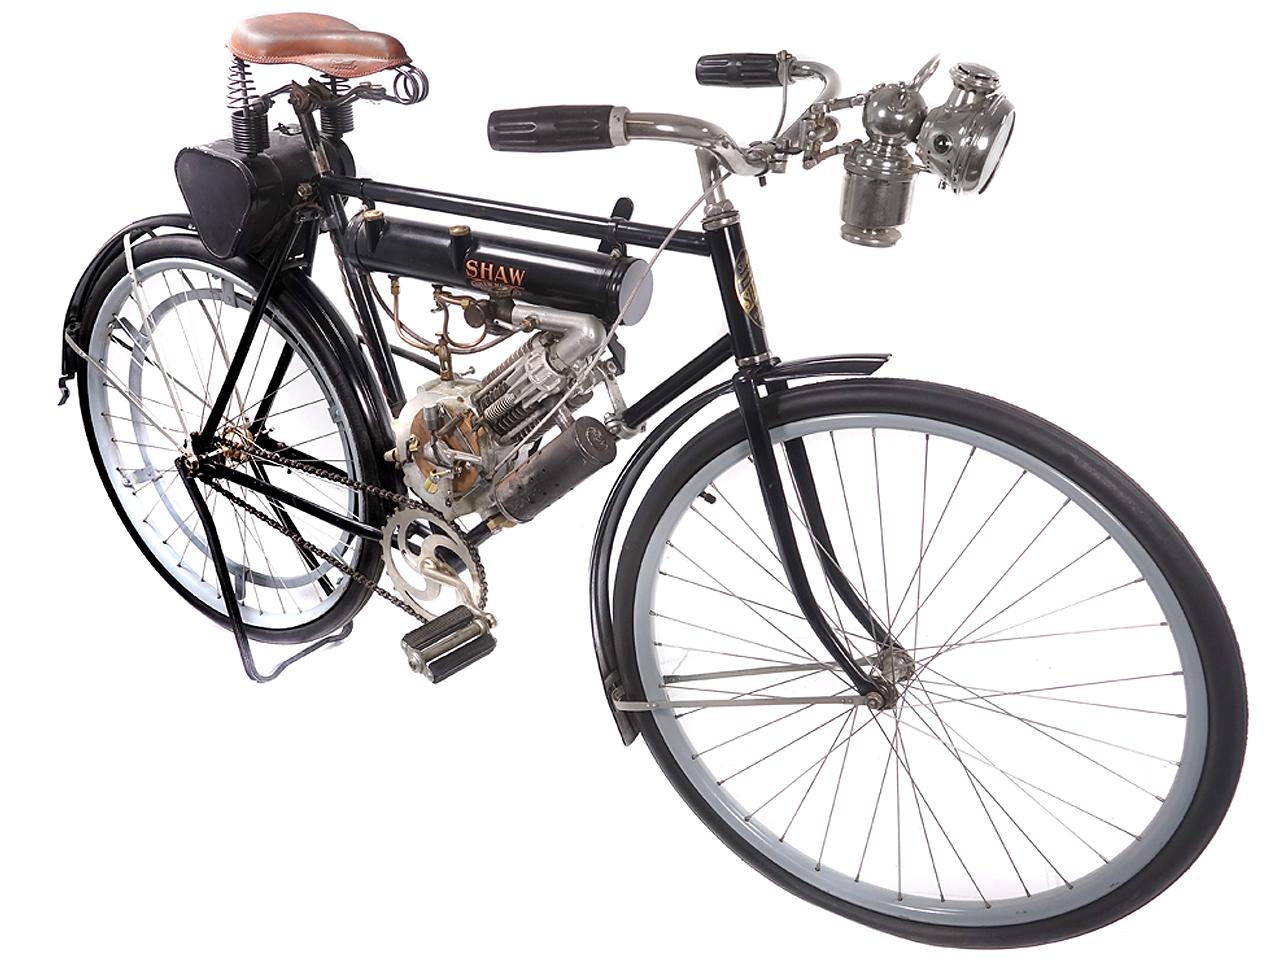 Industrial 1913 Shaw Lightweight Motorcycle